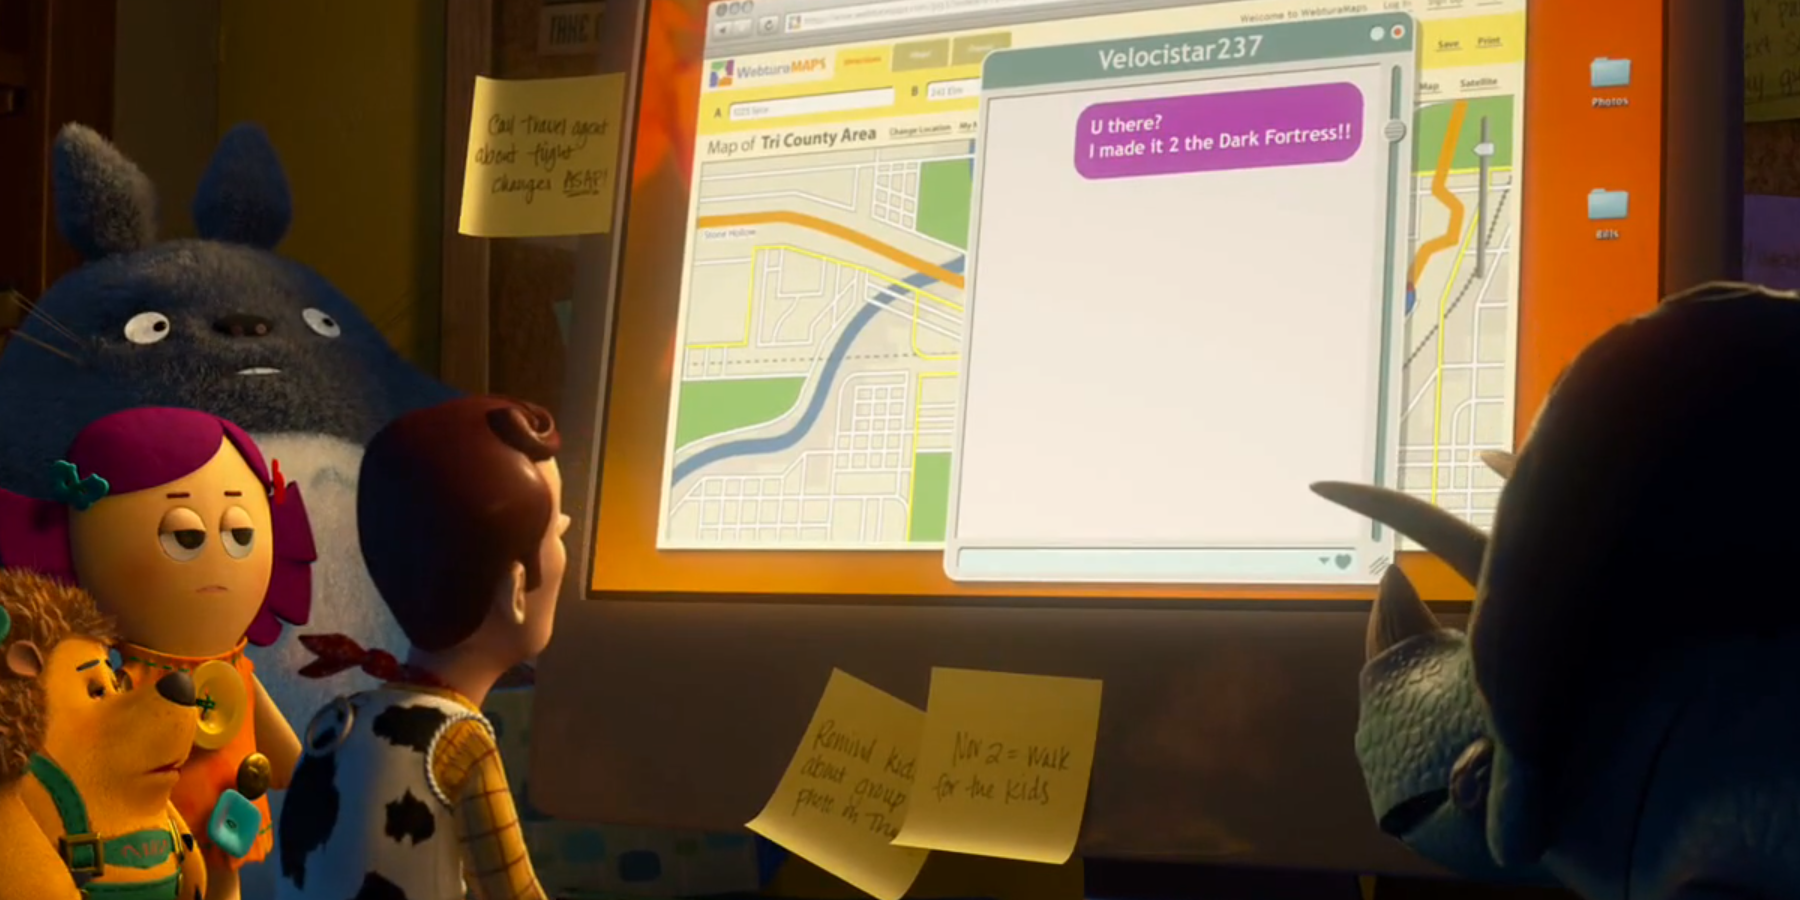 The Toys gathered around a computer featuring an IM from Velocistar237 in Toy Story 3